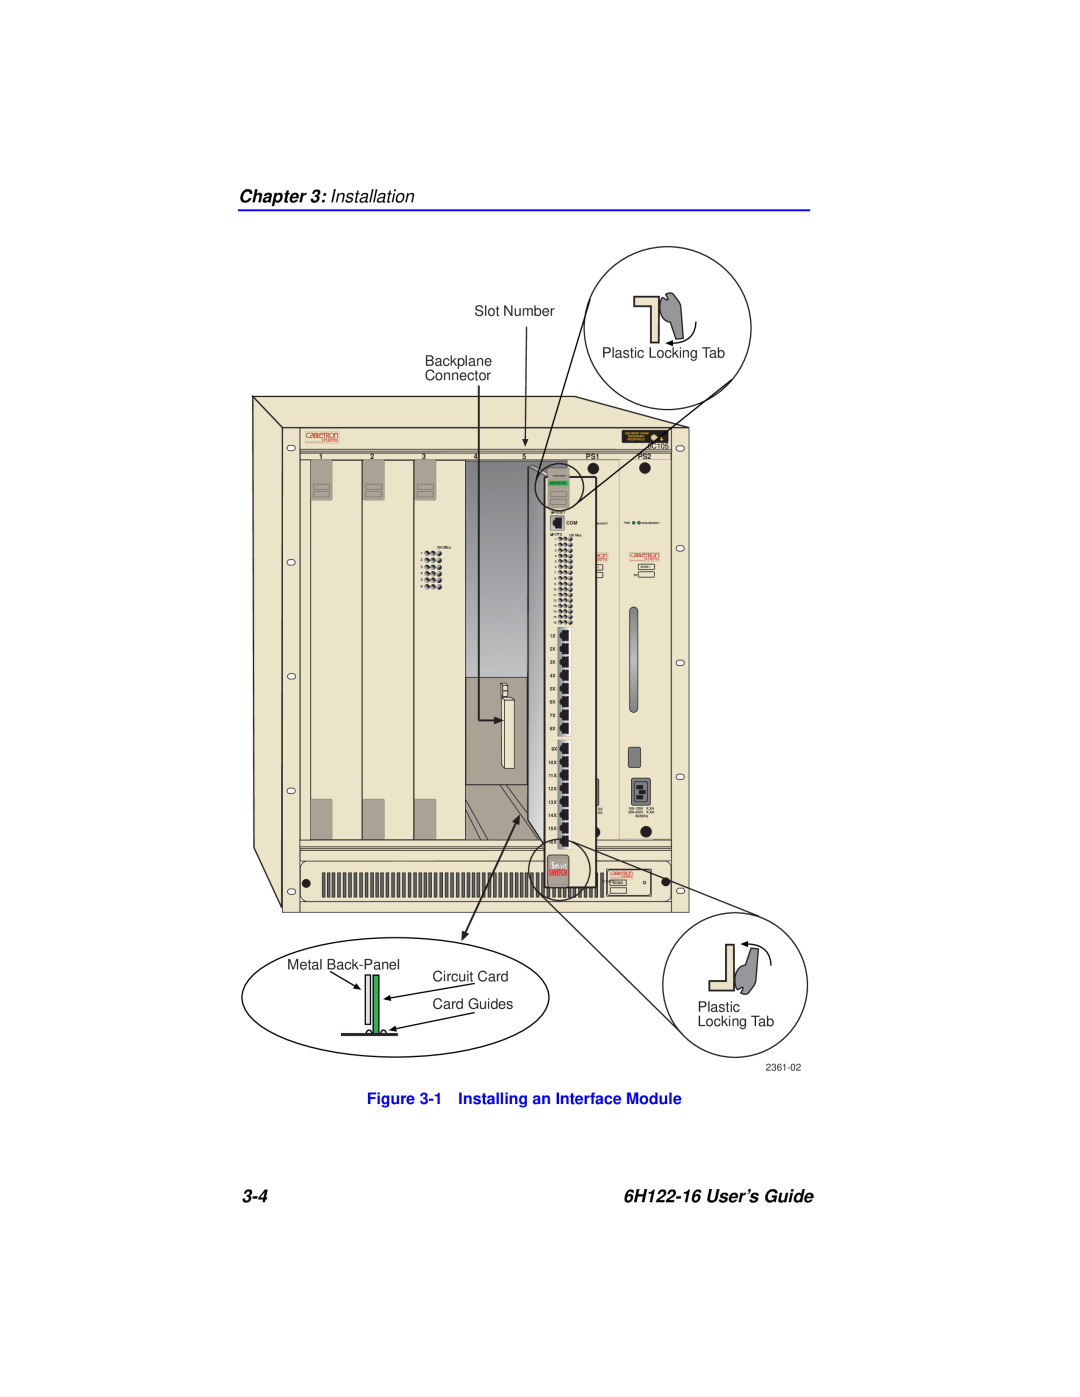 Cabletron Systems manual Installation, 6H122-16 User’s Guide, 1 Installing an Interface Module, Slot Number, Backplane 